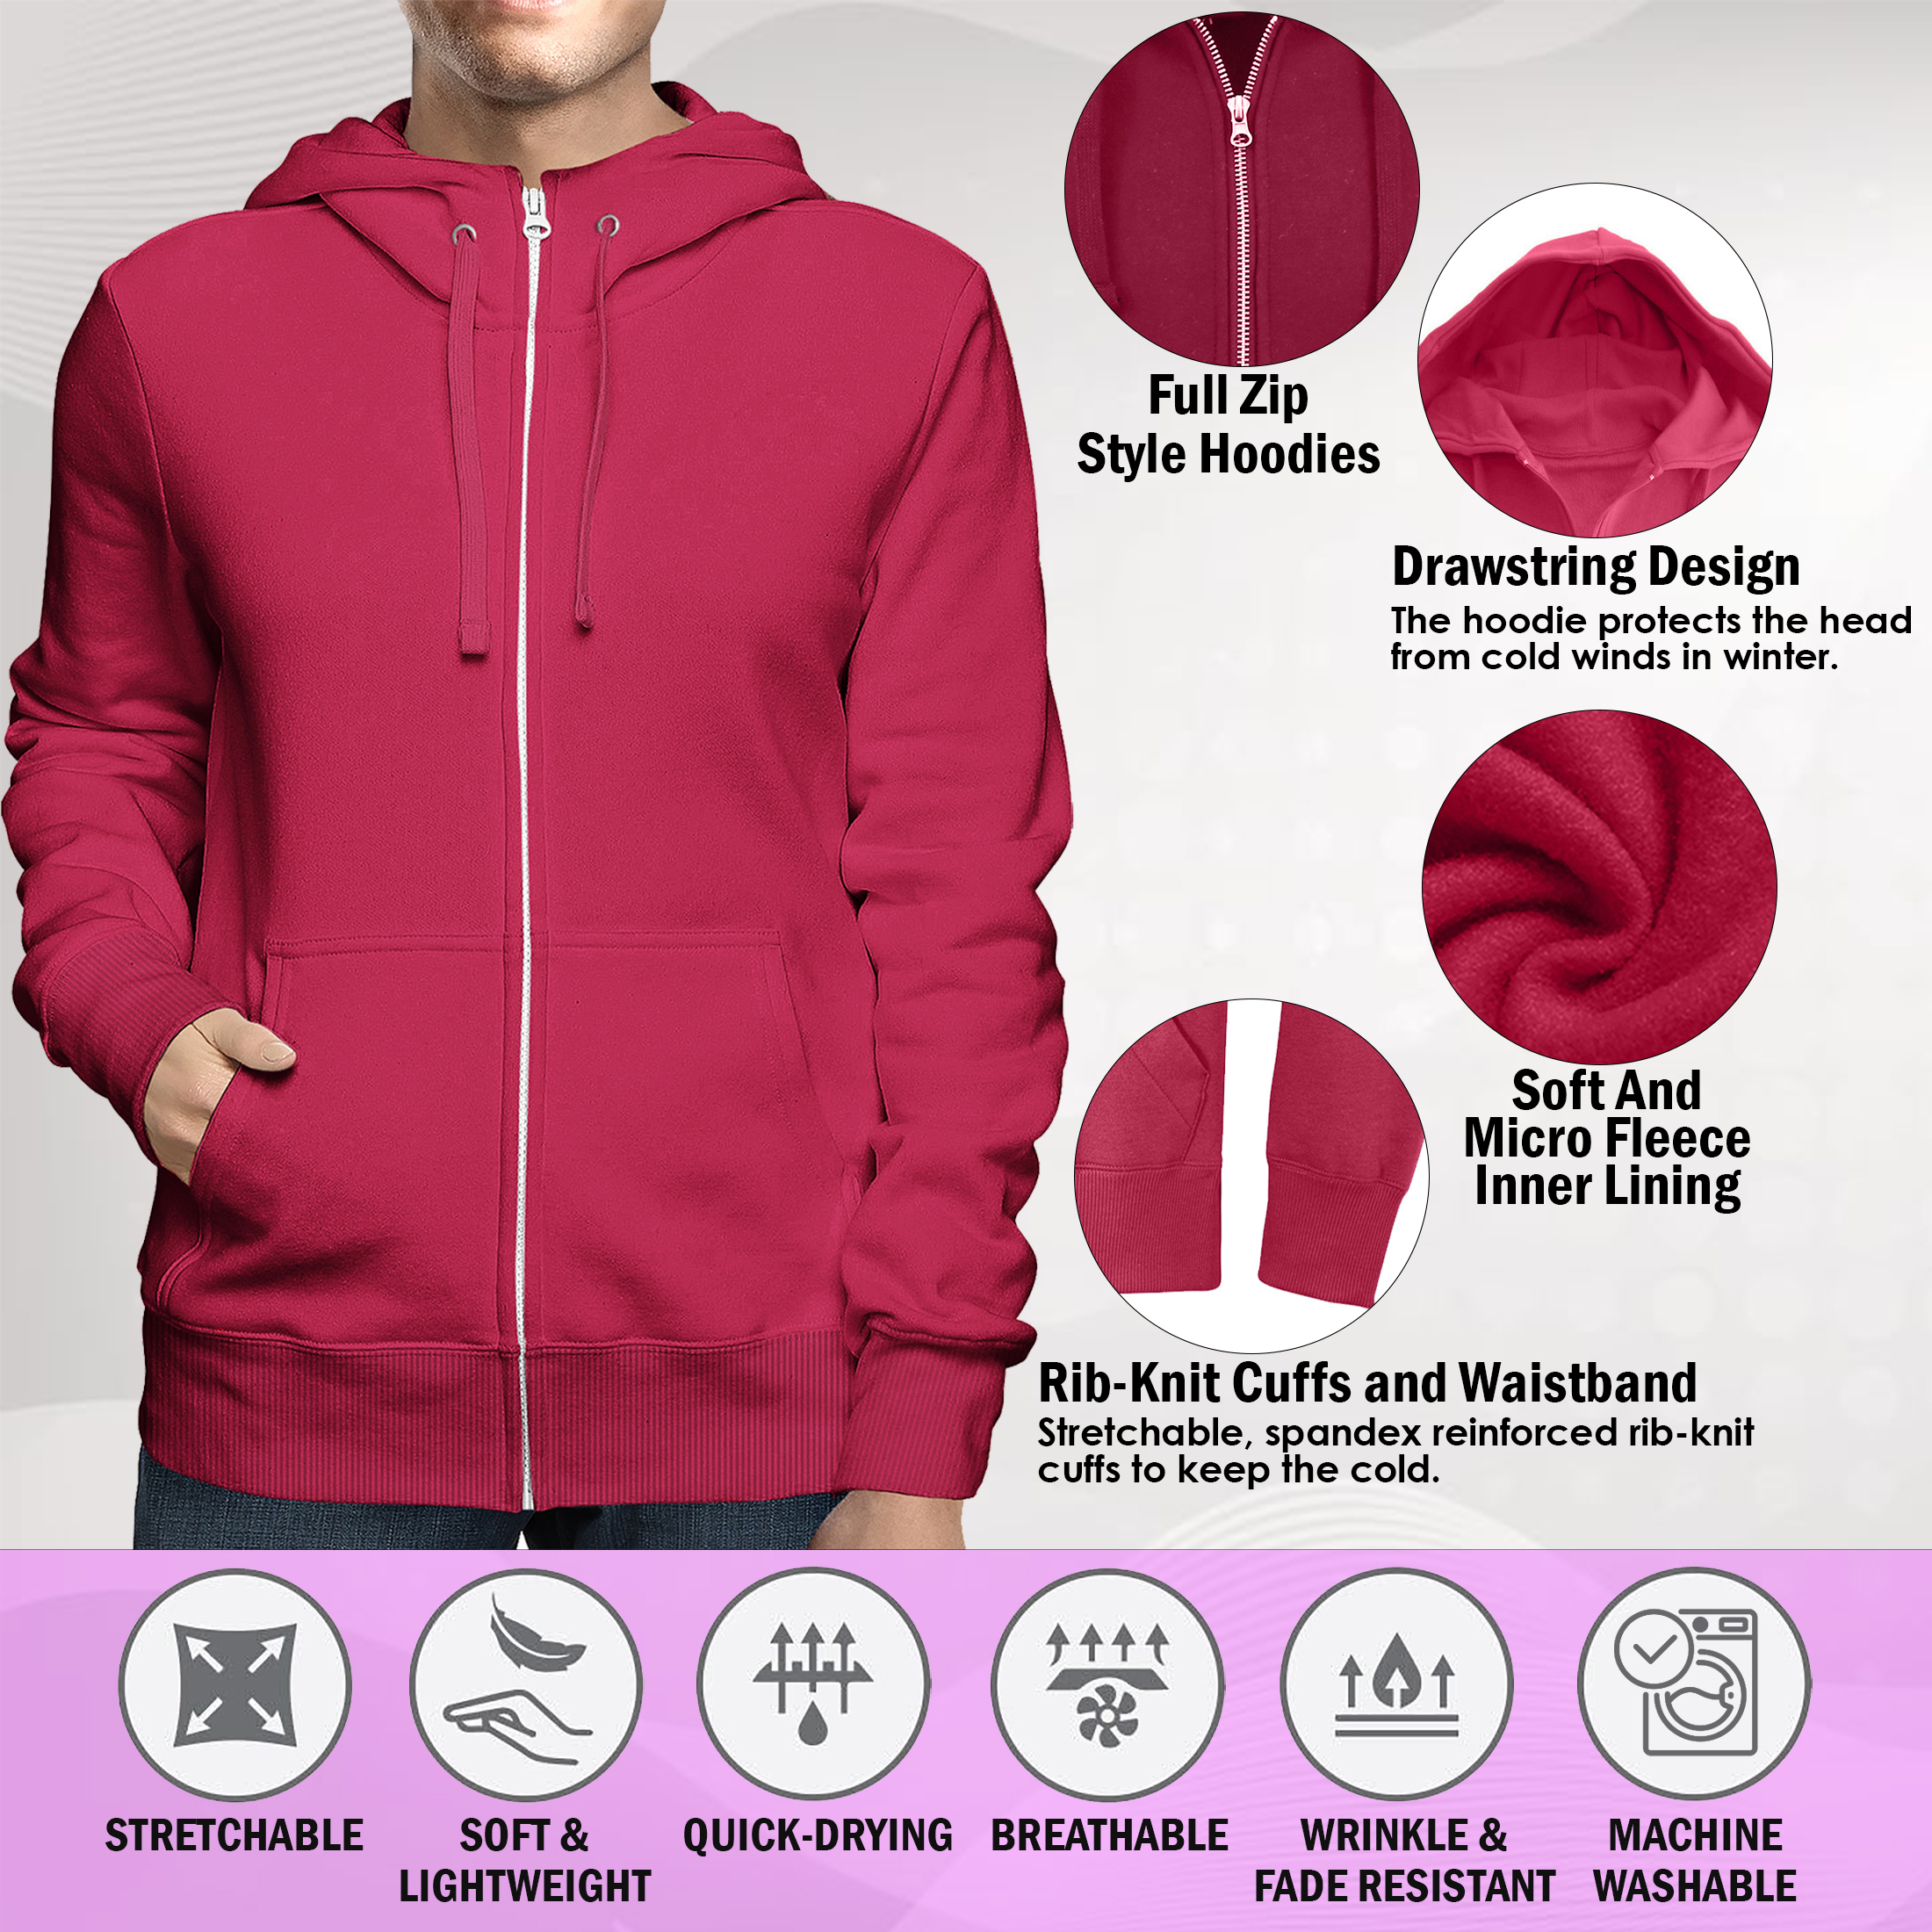 2-Pack: Men's Full Zip Up Fleece-Lined Hoodie Sweatshirt (Big & Tall Size Available) - Burgundy & Olive, Large